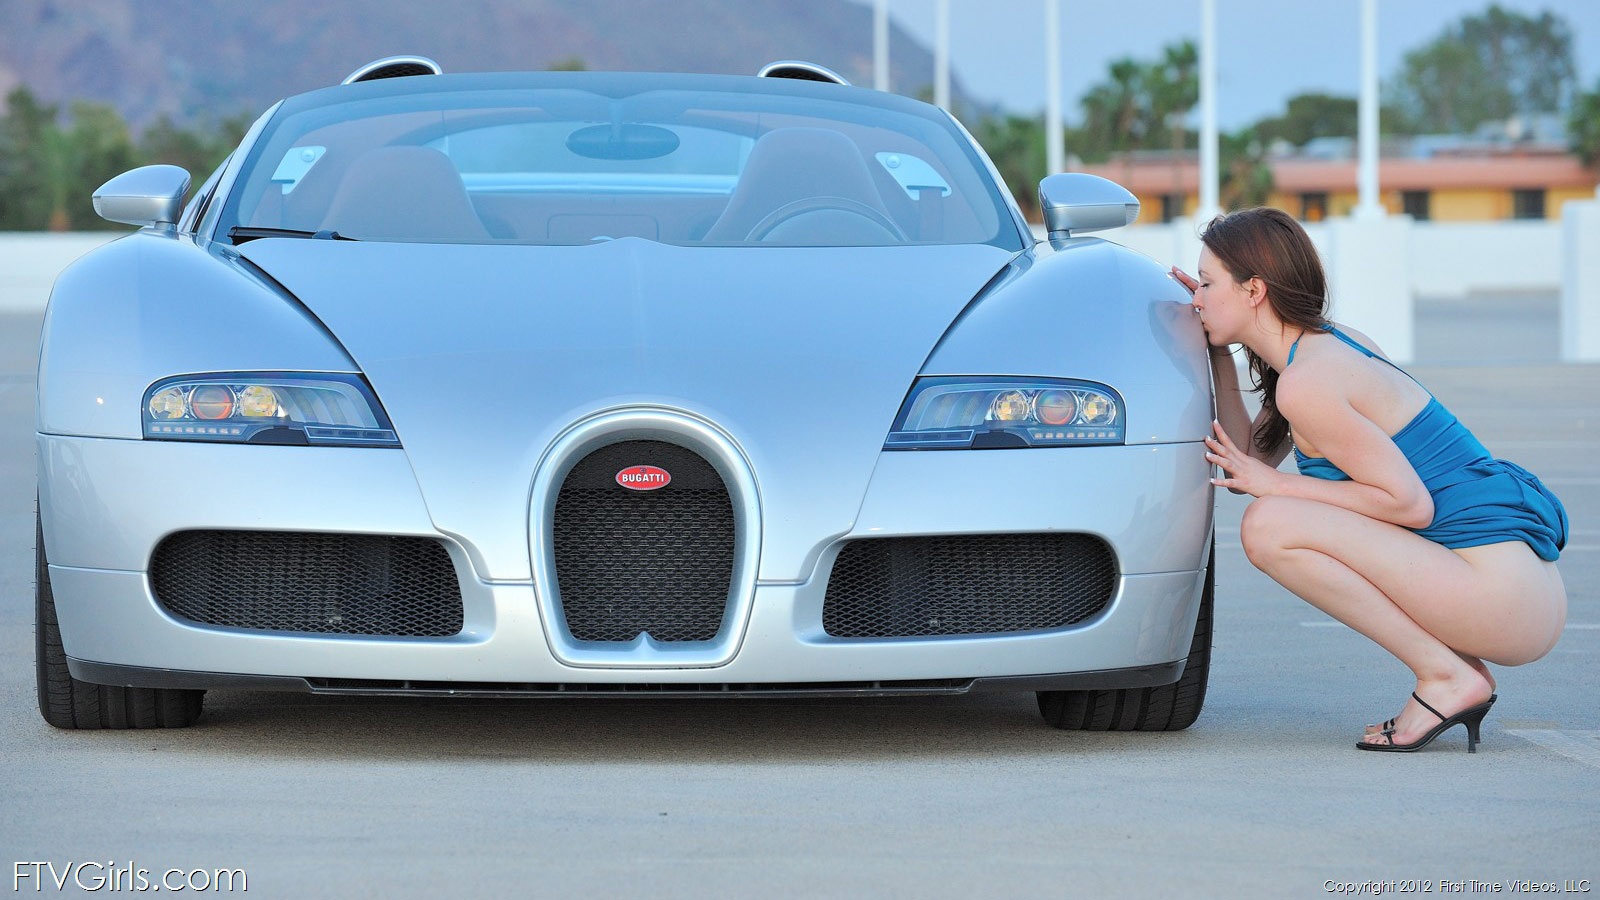 Bugatti Veyron And Naked Blonde Beauty With A Perfect Round Ass Kissing The Supercar Hd 2755